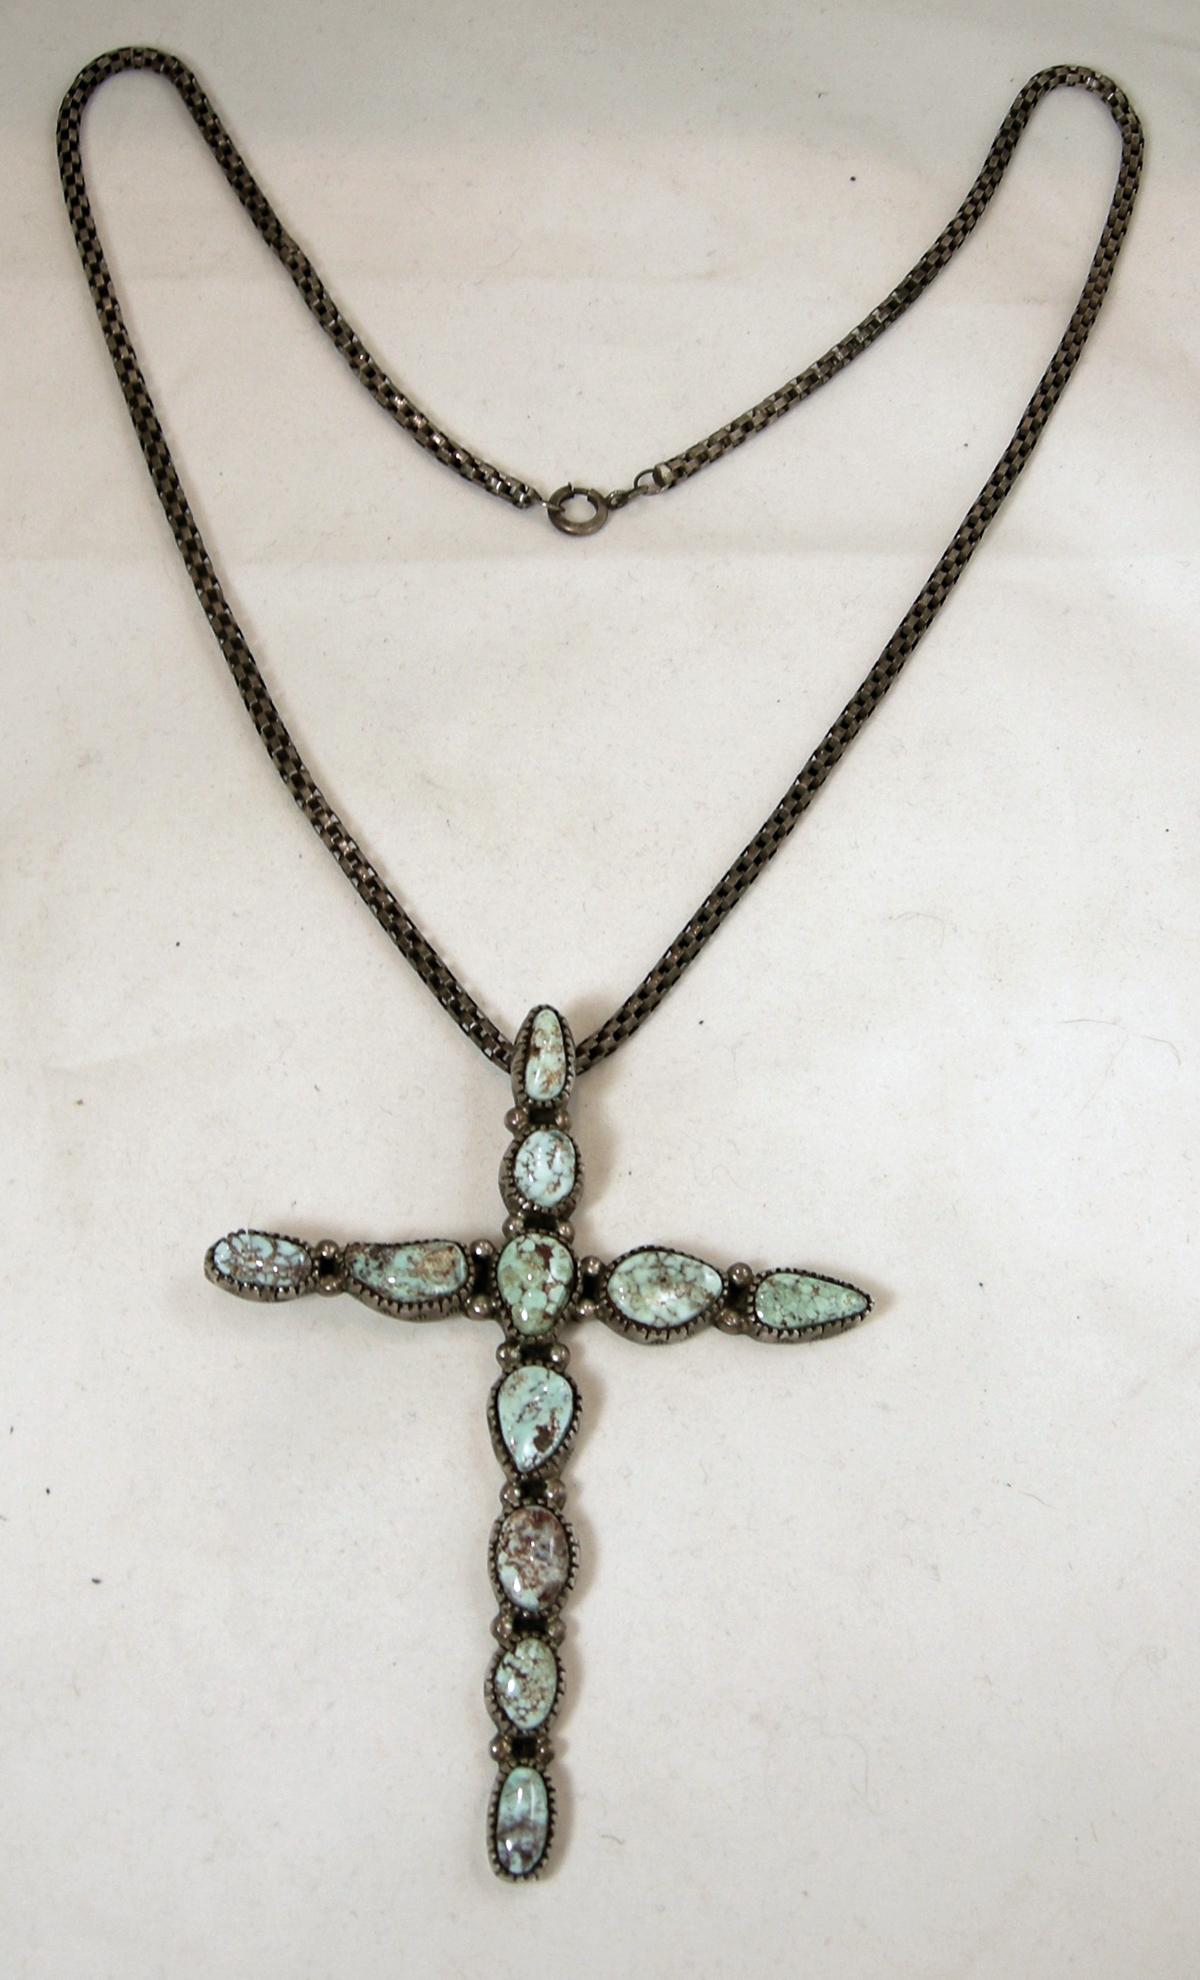 Tom Willeto created this vintage sterling silver Navajo cross. It has bezel green turquoise stones … 7 turquoise stones going down and 4 across.  It is signed “Tom Willeto Sterling”.  The sterling chain is 25-1/2” long and weighs 8.5 dwt.  The Cross